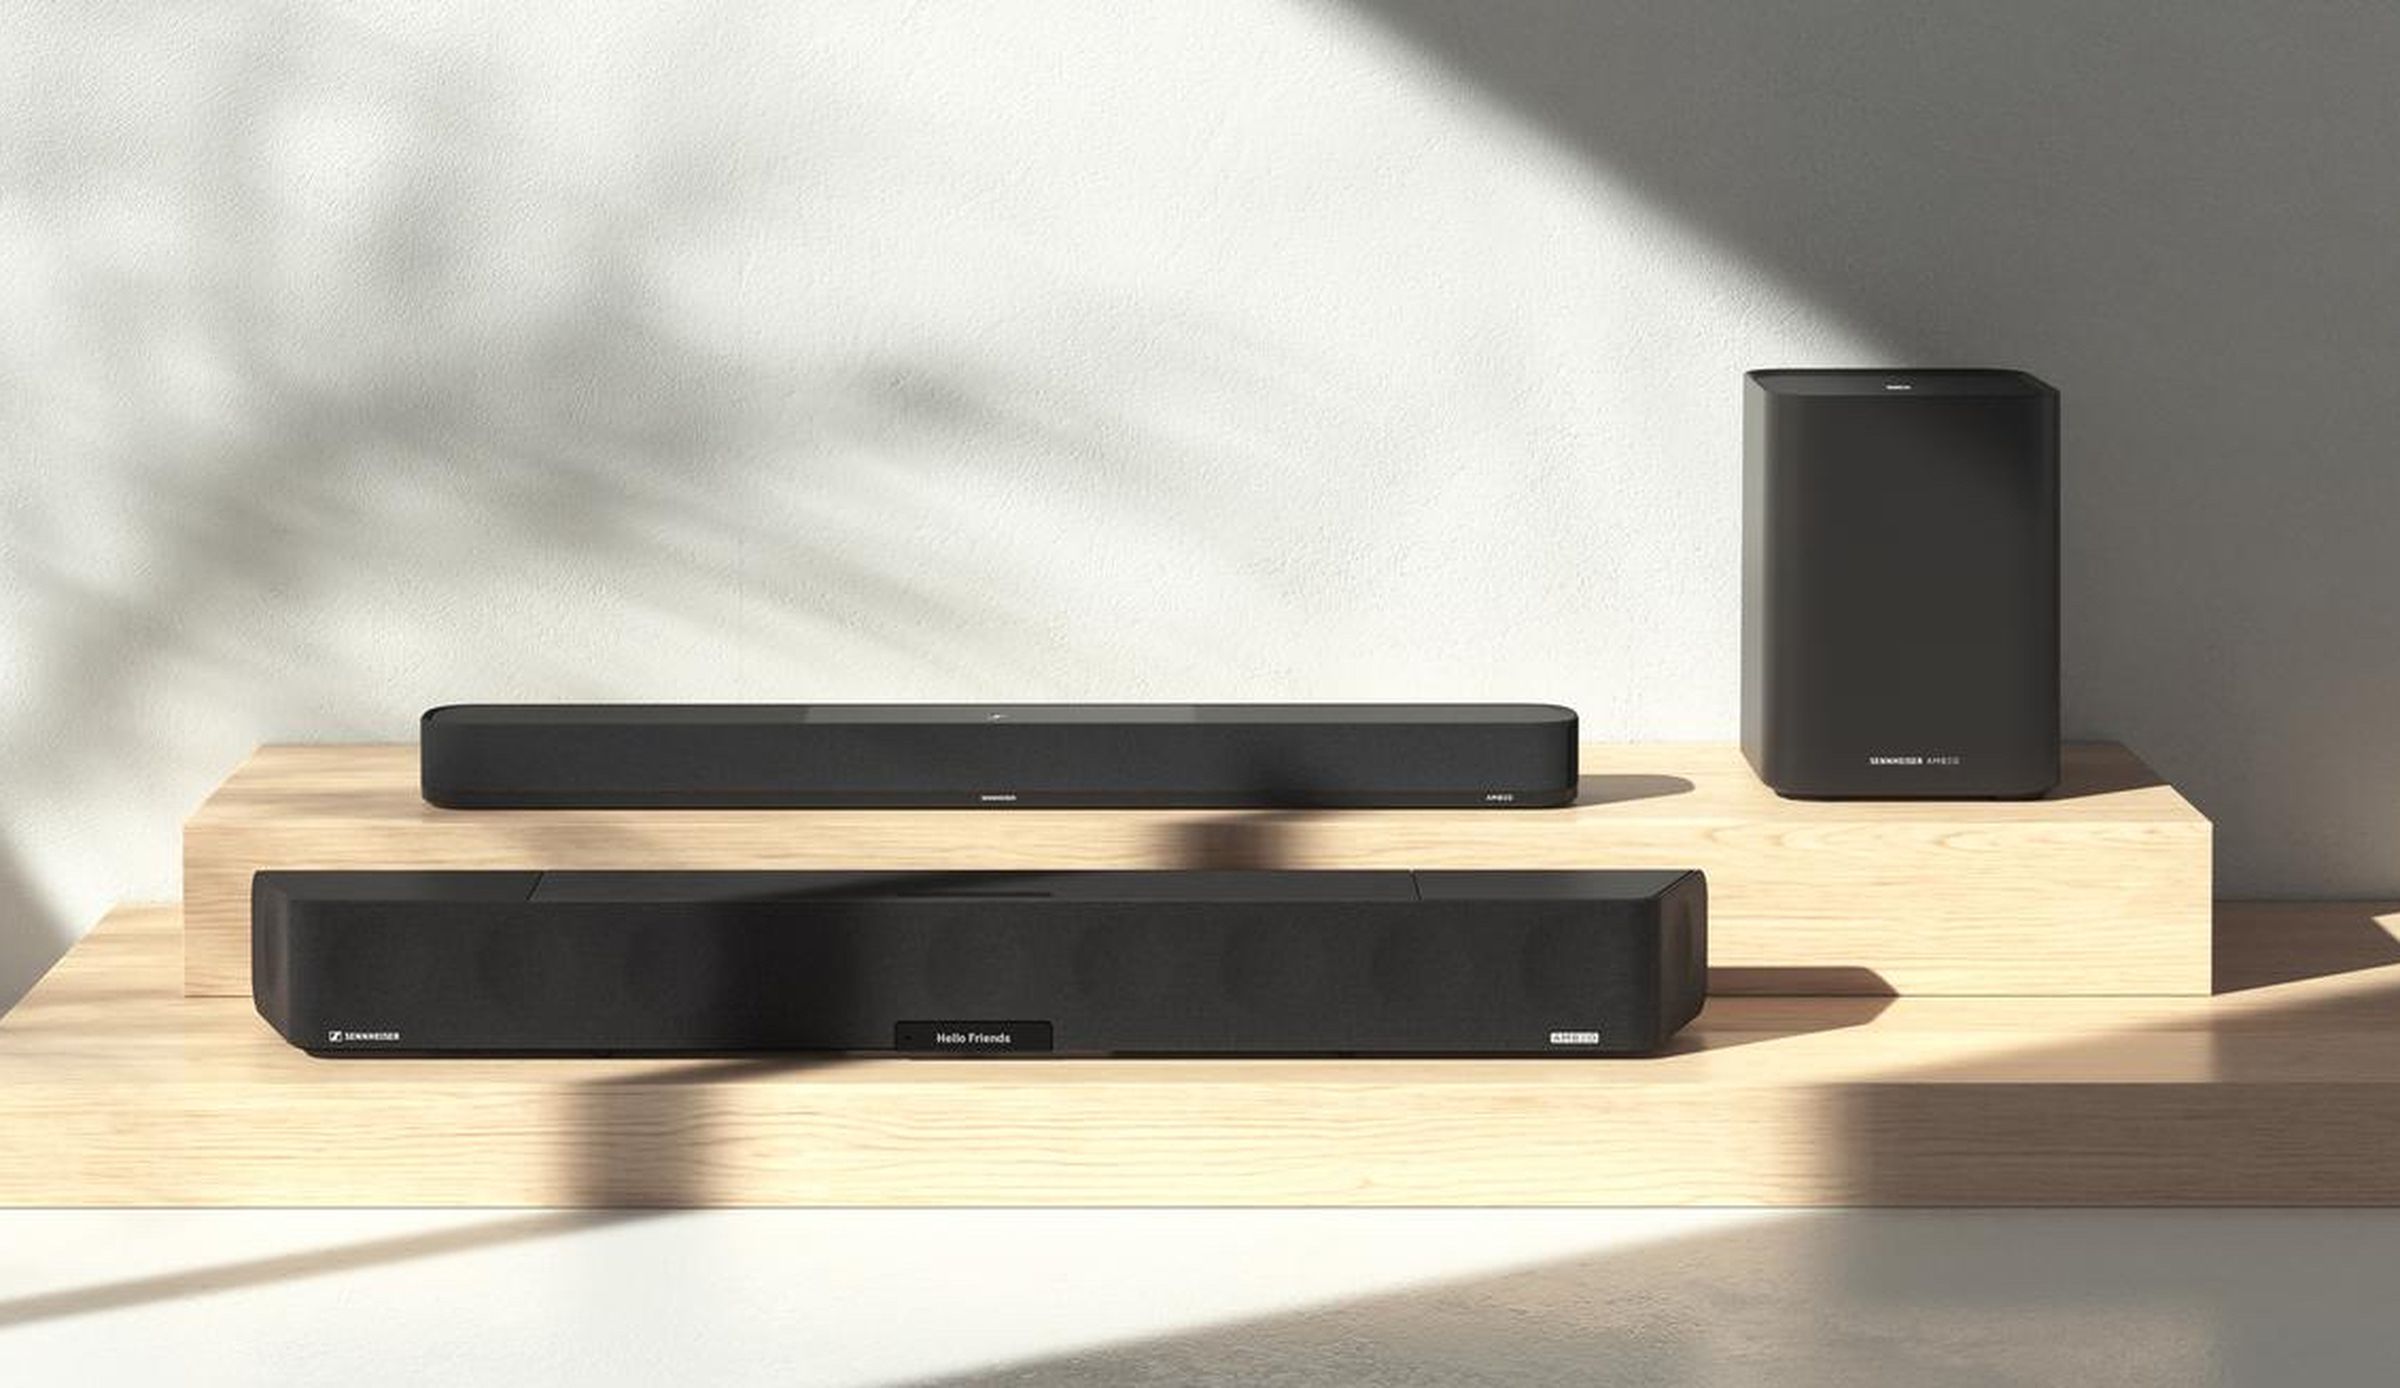 At front is the Ambeo Soundbar Max, with the new Ambeo Soundbar Plus behind it and the Ambeo Sub to the right.